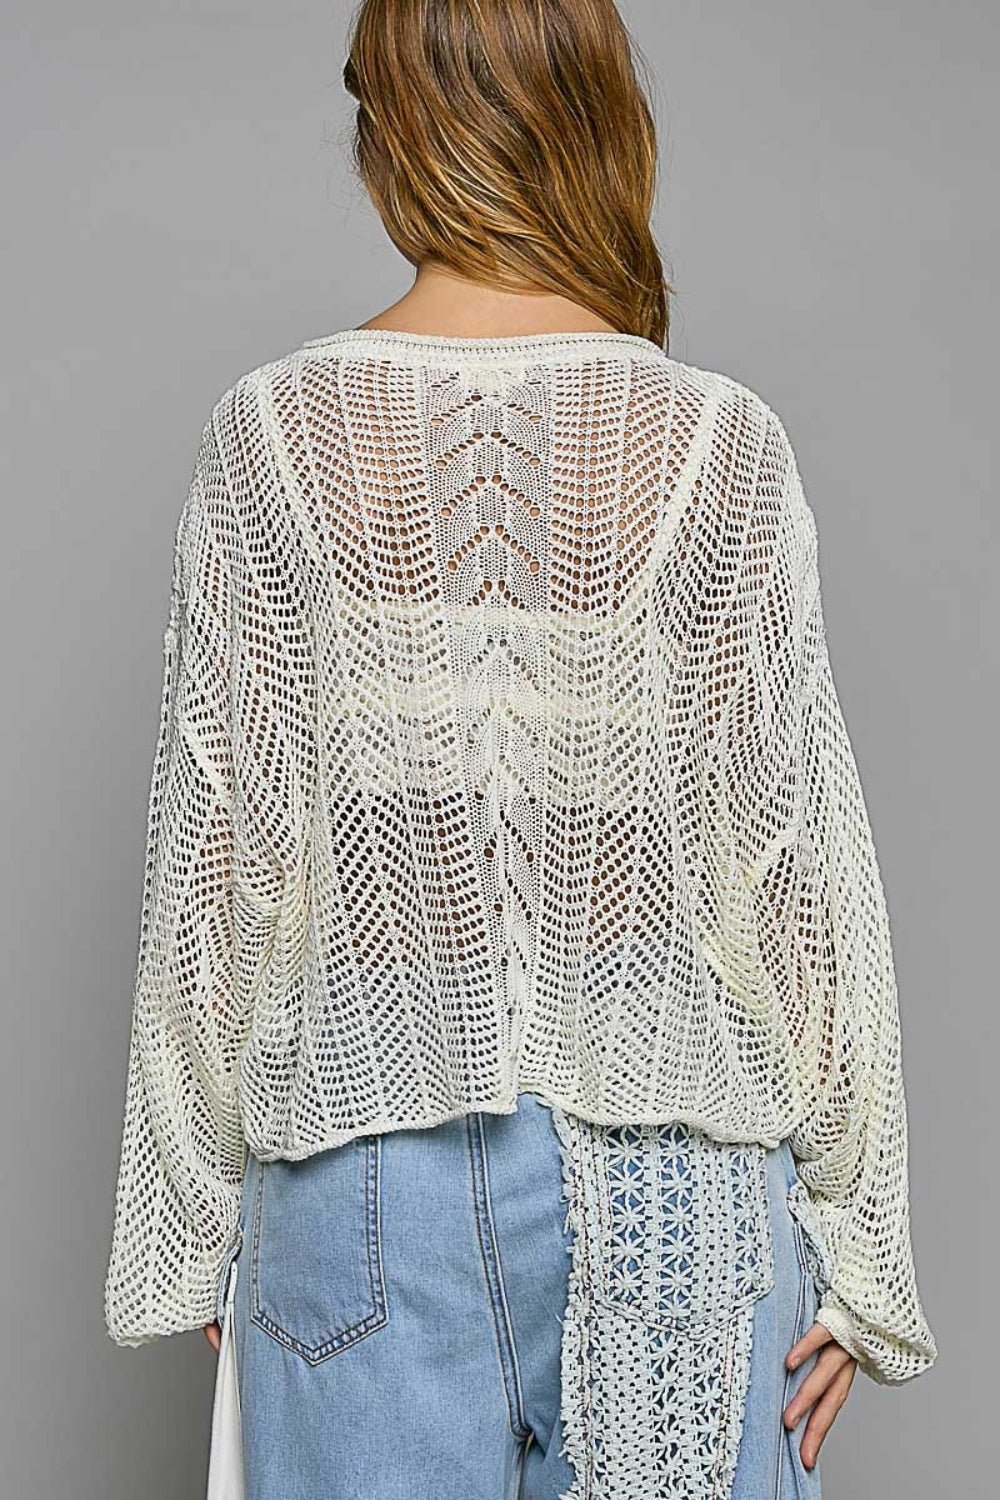 Openwork Balloon Sleeve Knit Cover Up - My Threaded Apparel | Online Women's Boutique - crochet top